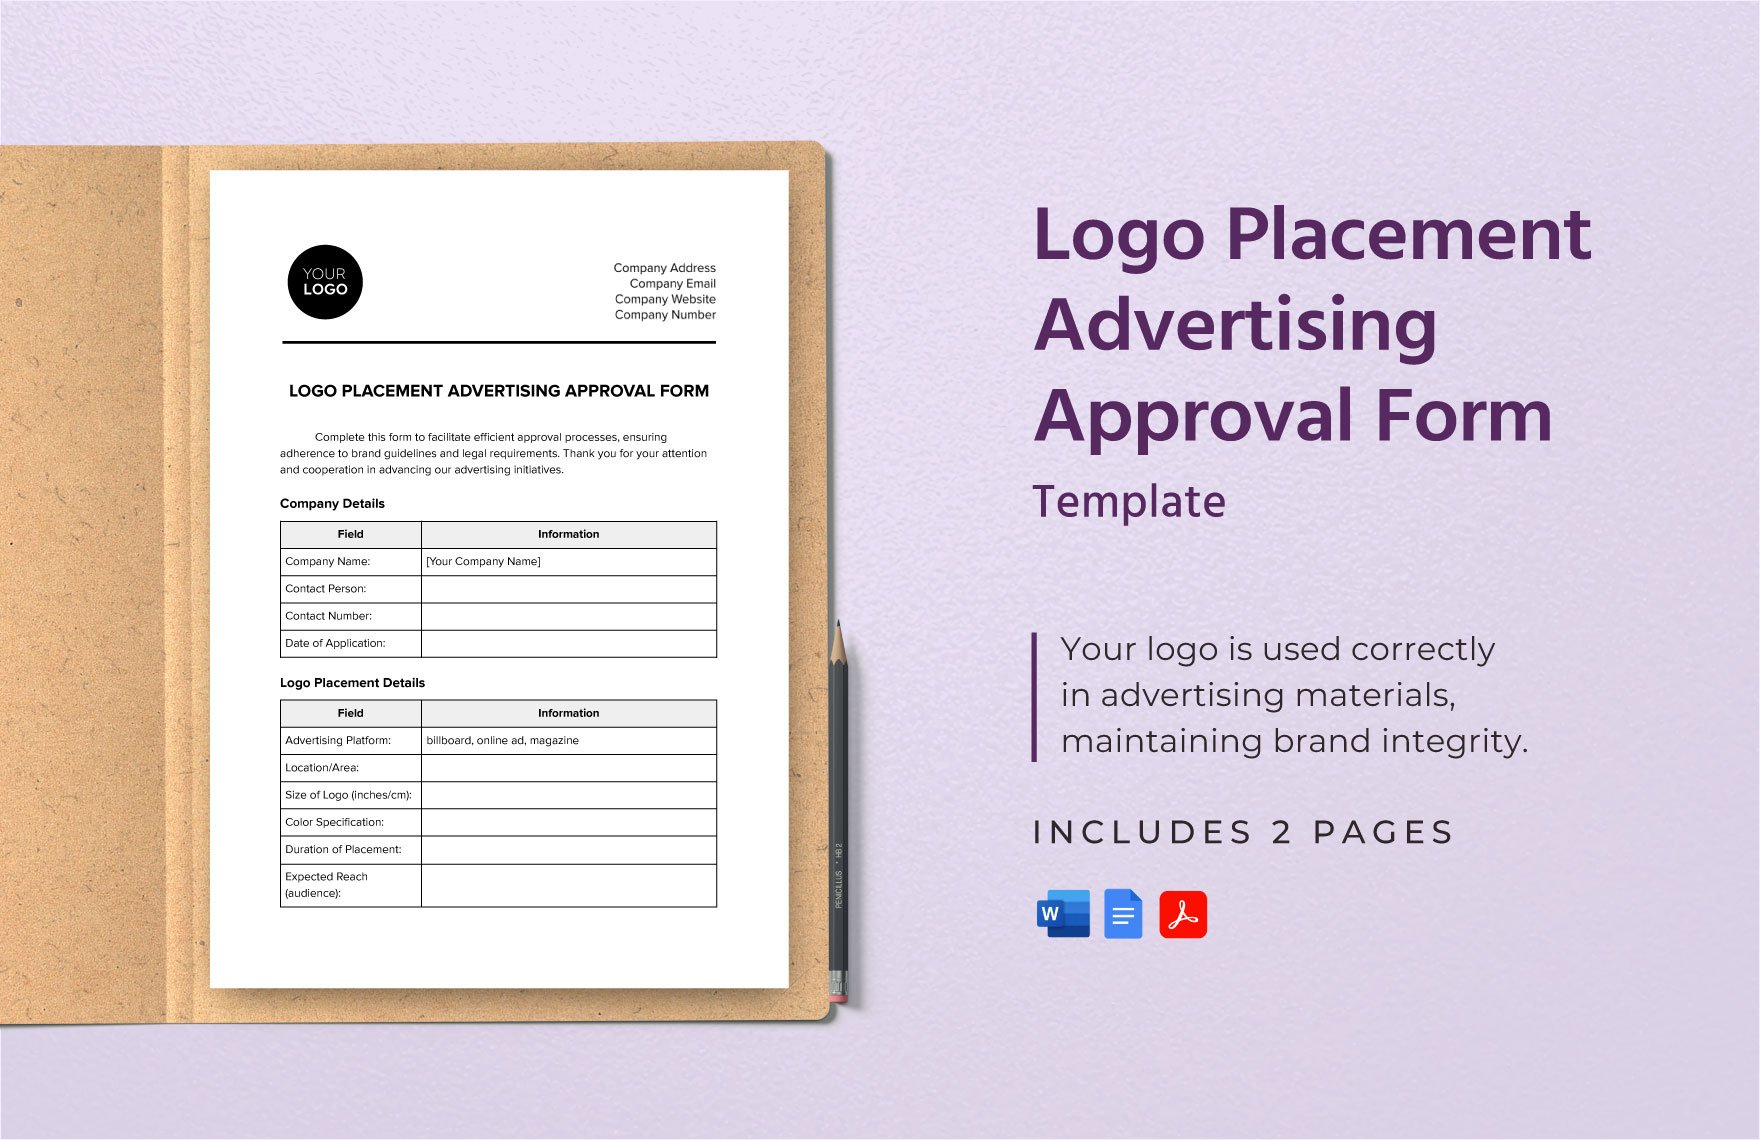 Logo Placement Advertising Approval Form Template in Word, Google Docs, PDF